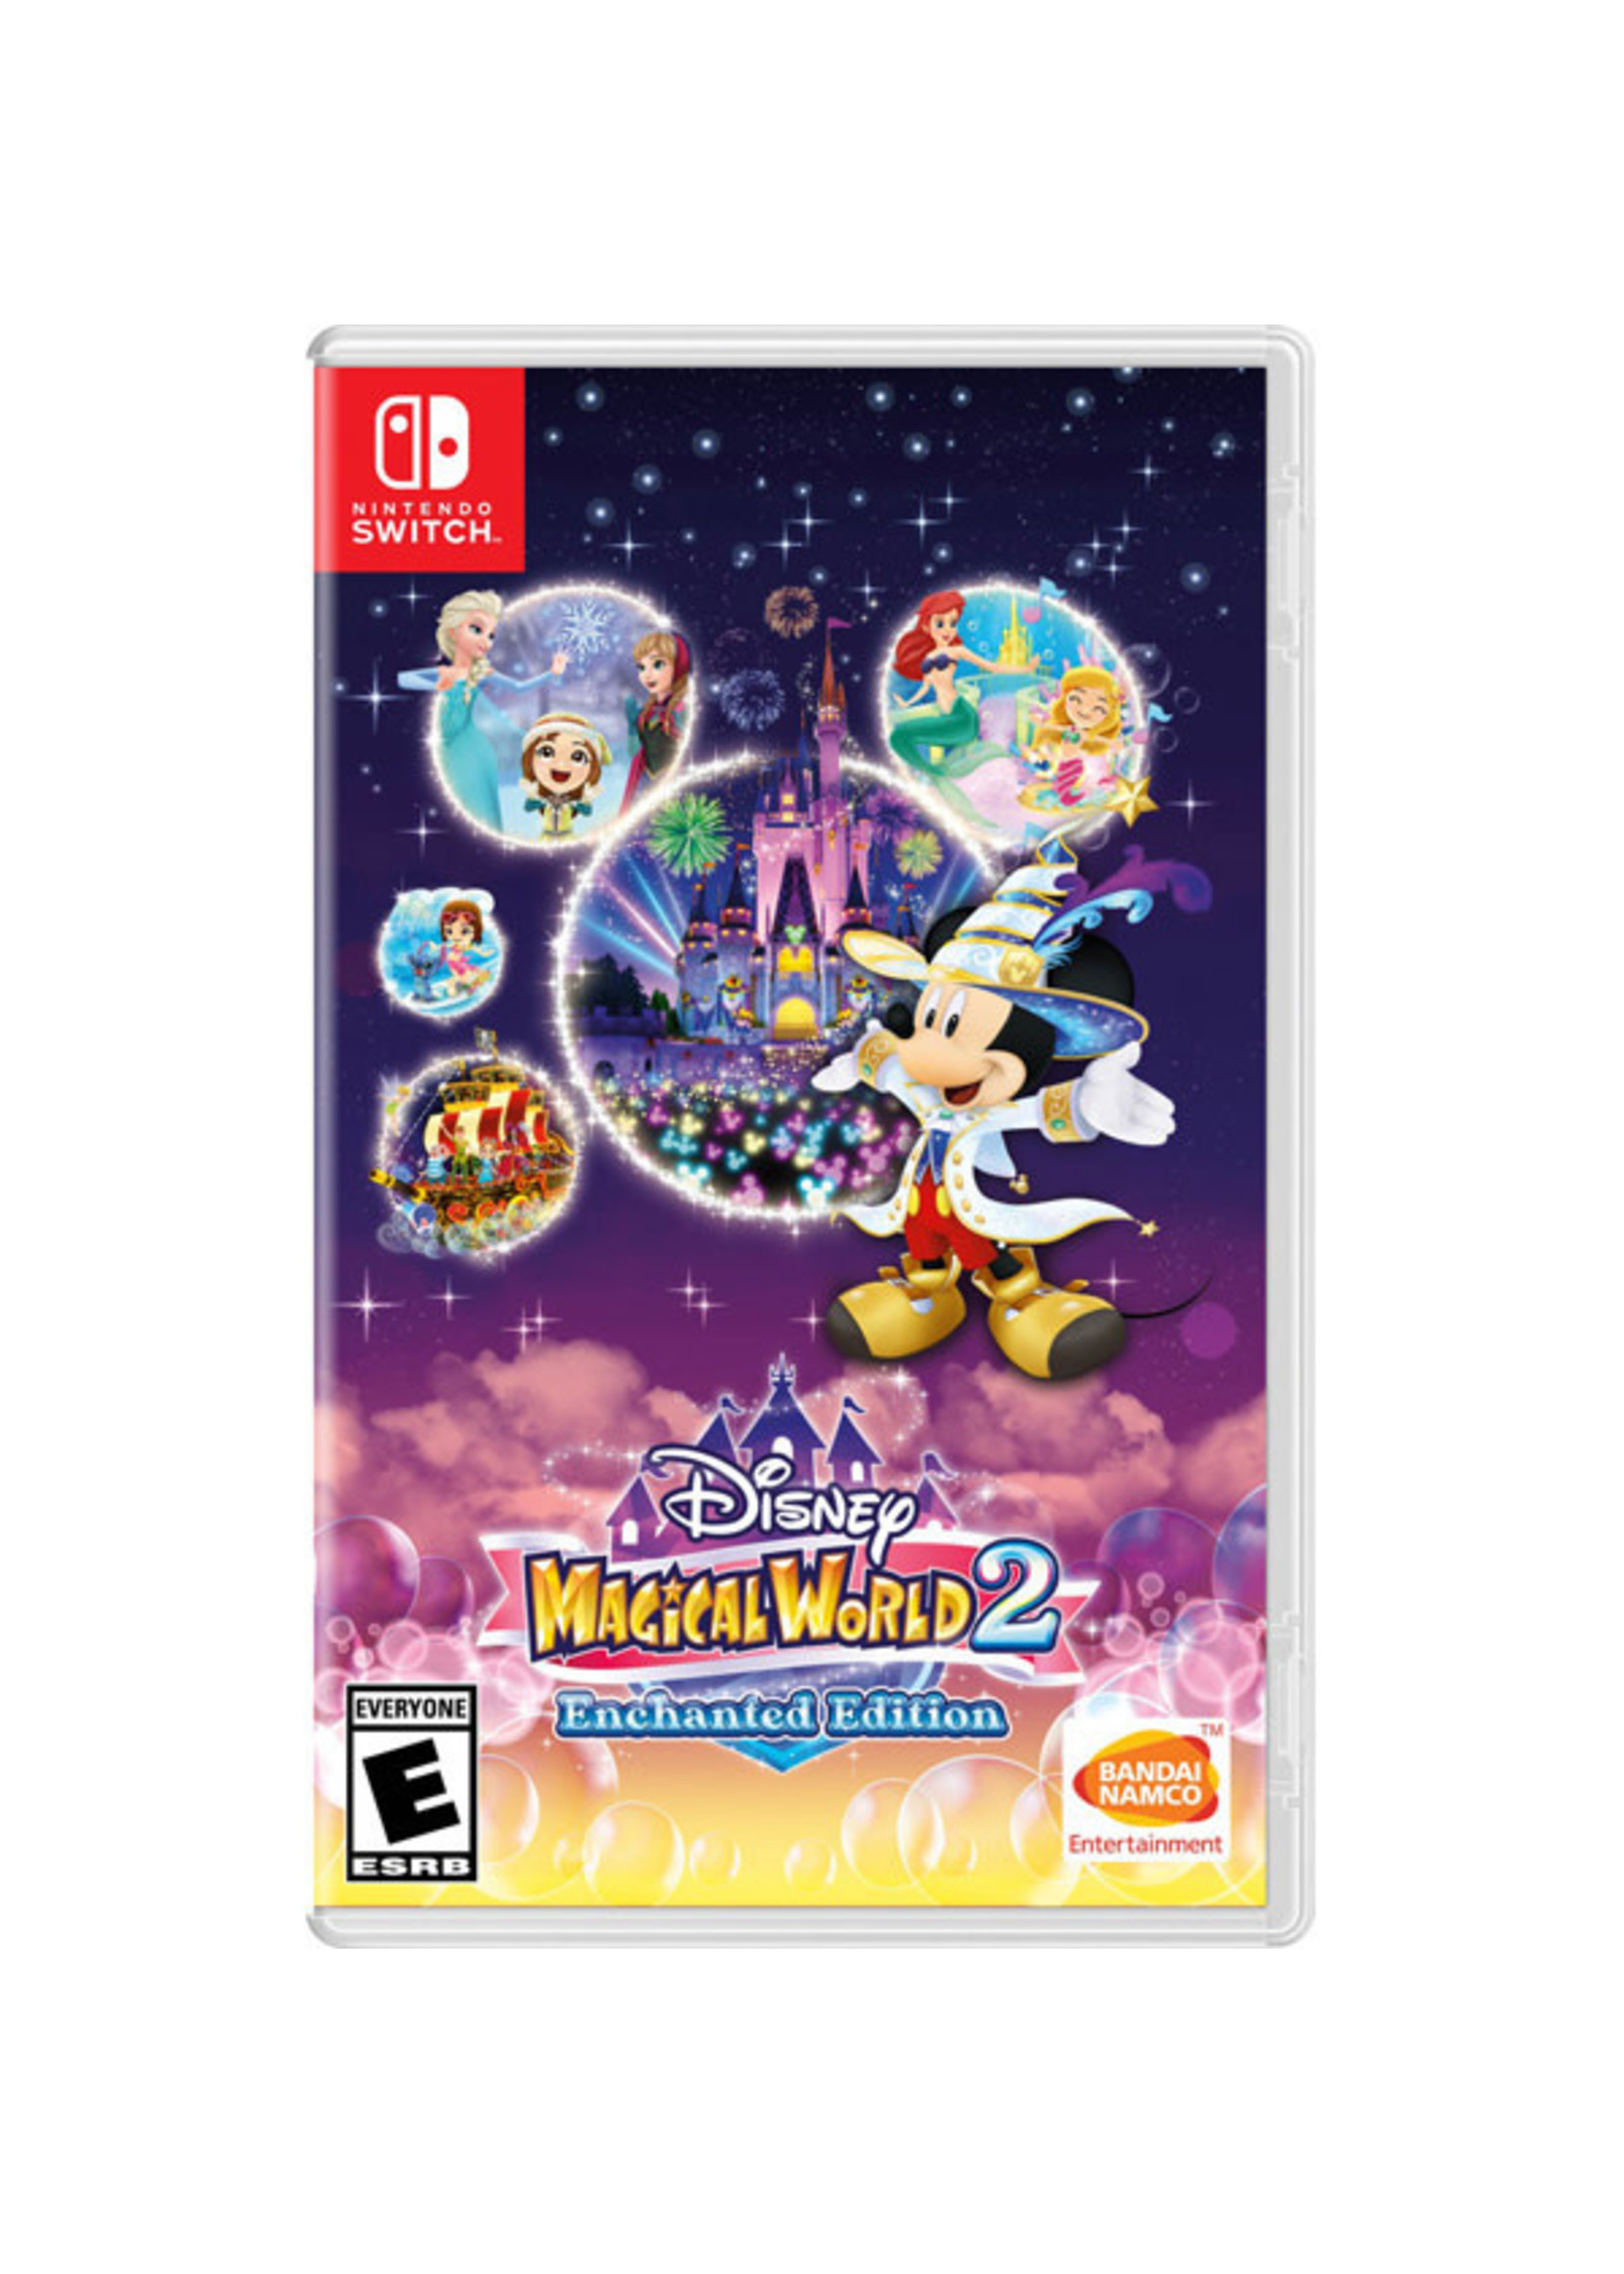 DISNEY MAGICAL WORLD 2 ENCHANTED EDITION SWITCH